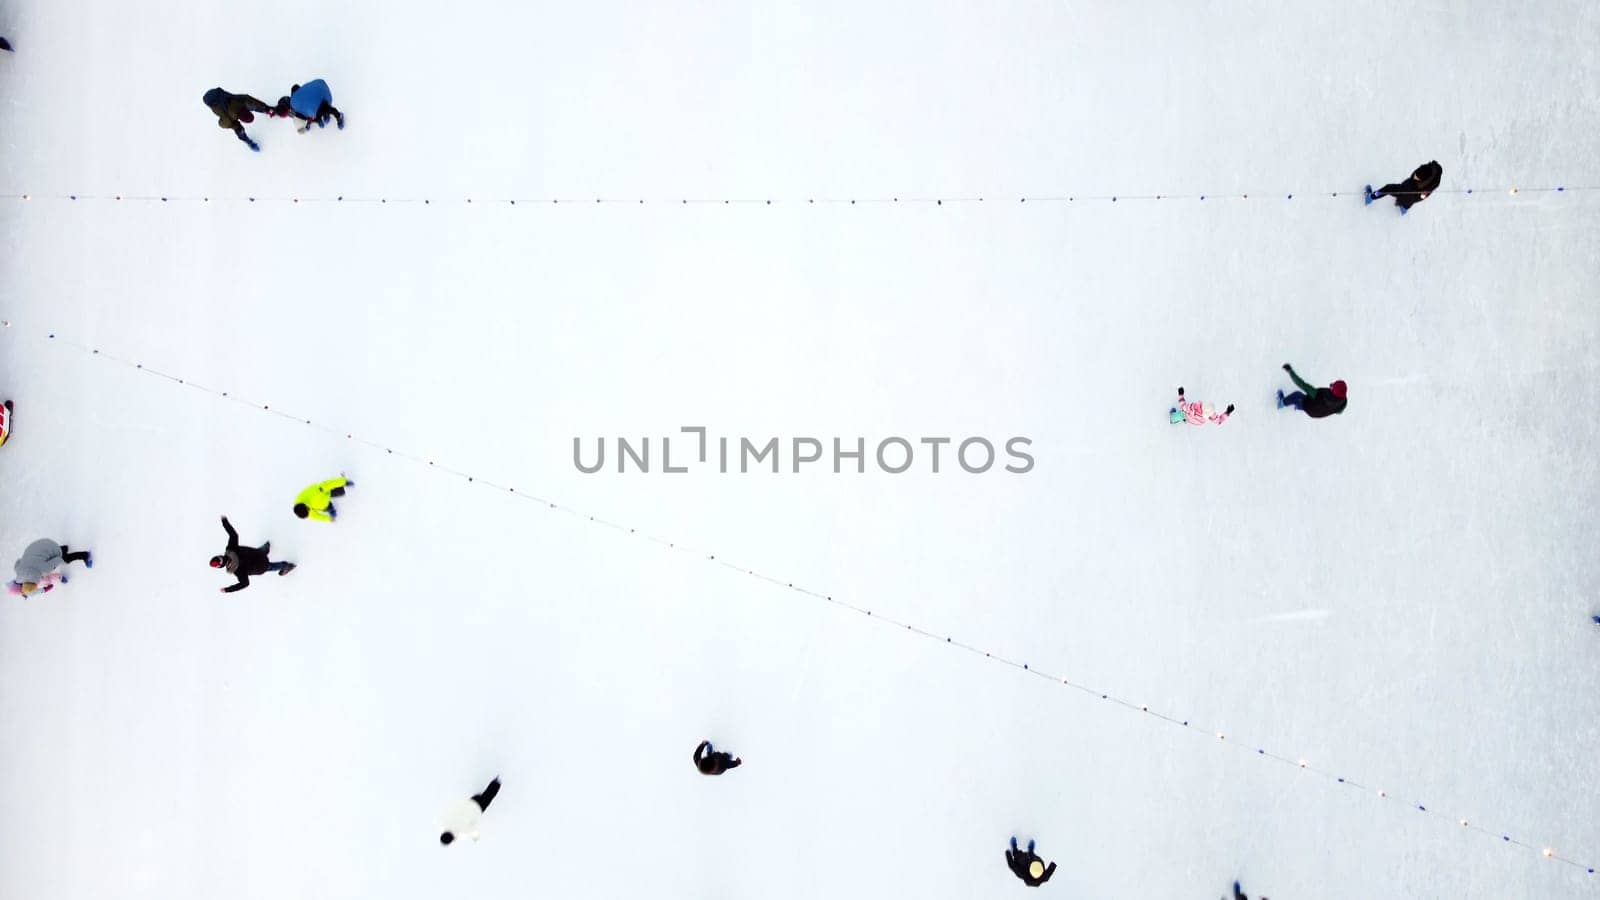 Many people skating on white ice skating rink outdoors on winter day top view. Aerial drone view. New Year Christmas celebration holidays recreation sport enjoying lifestyle sportive fun background.